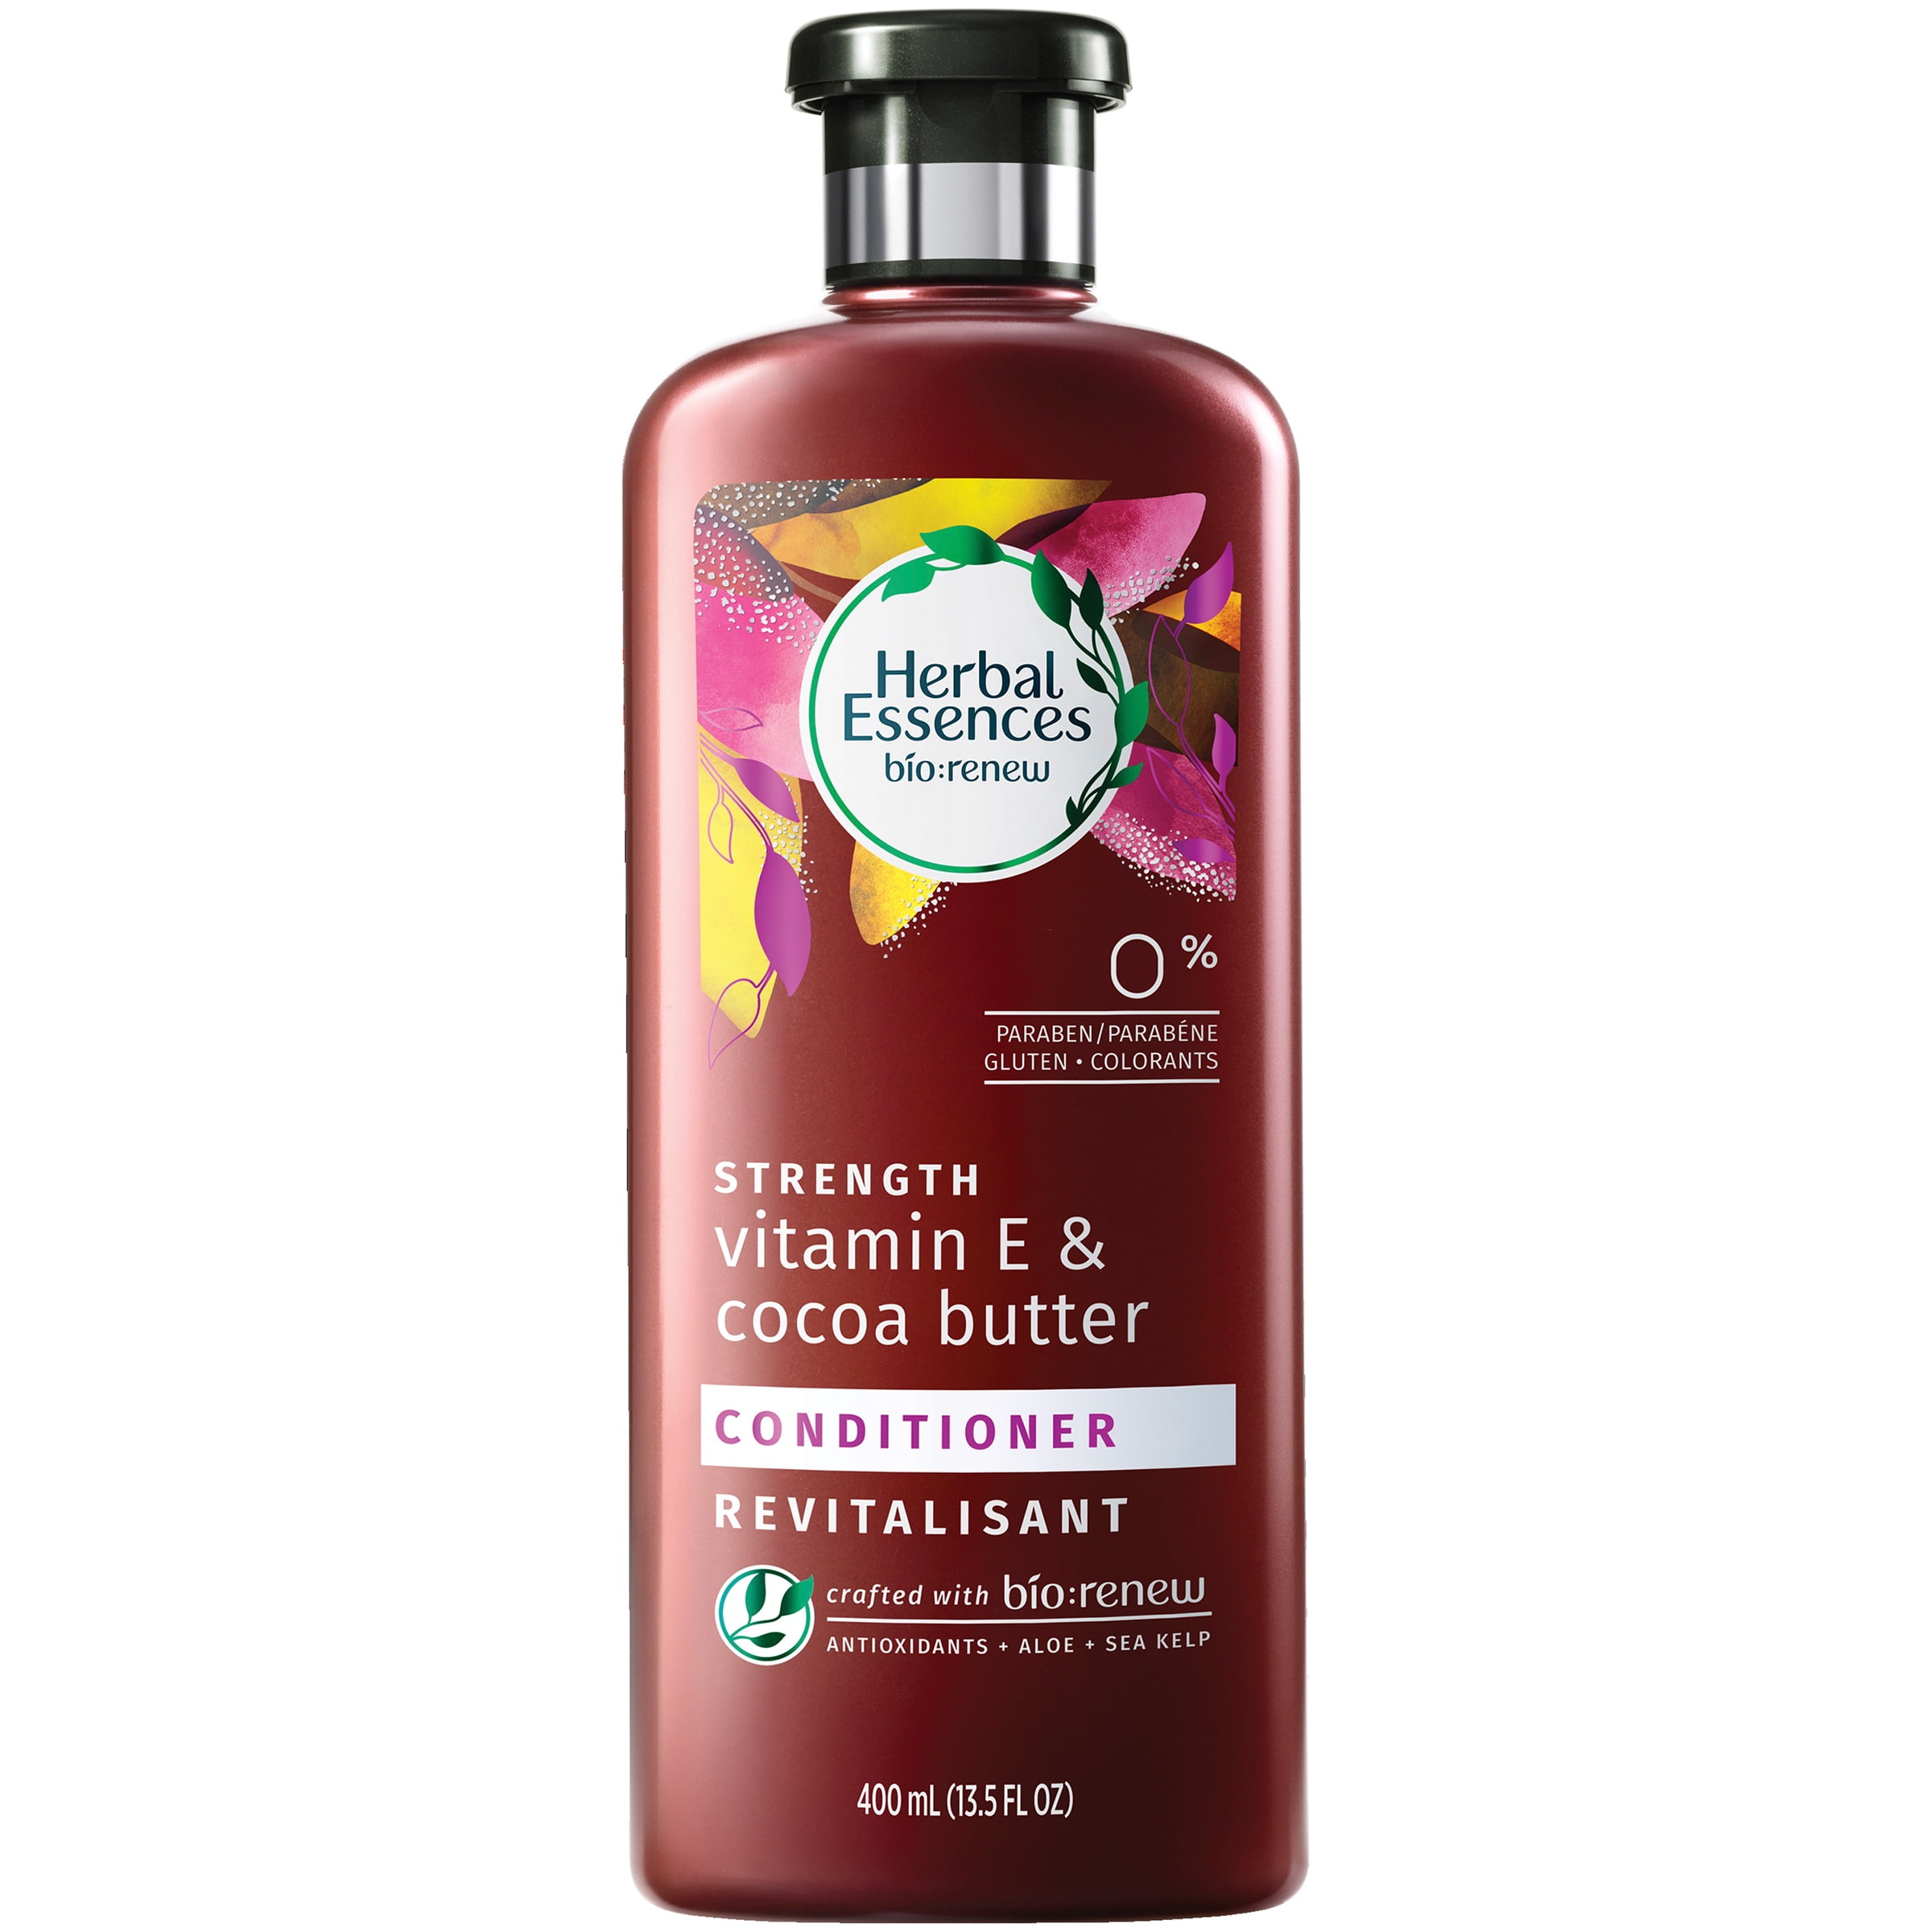 Herbal essences масло. Шампунь Herbal Essences Bio Renew. Herbal Essences шампунь масло моринги. Herbal Essences Bio Renew масло для волос. Шампунь Cocoa Butter with Aloe Vitamin e.